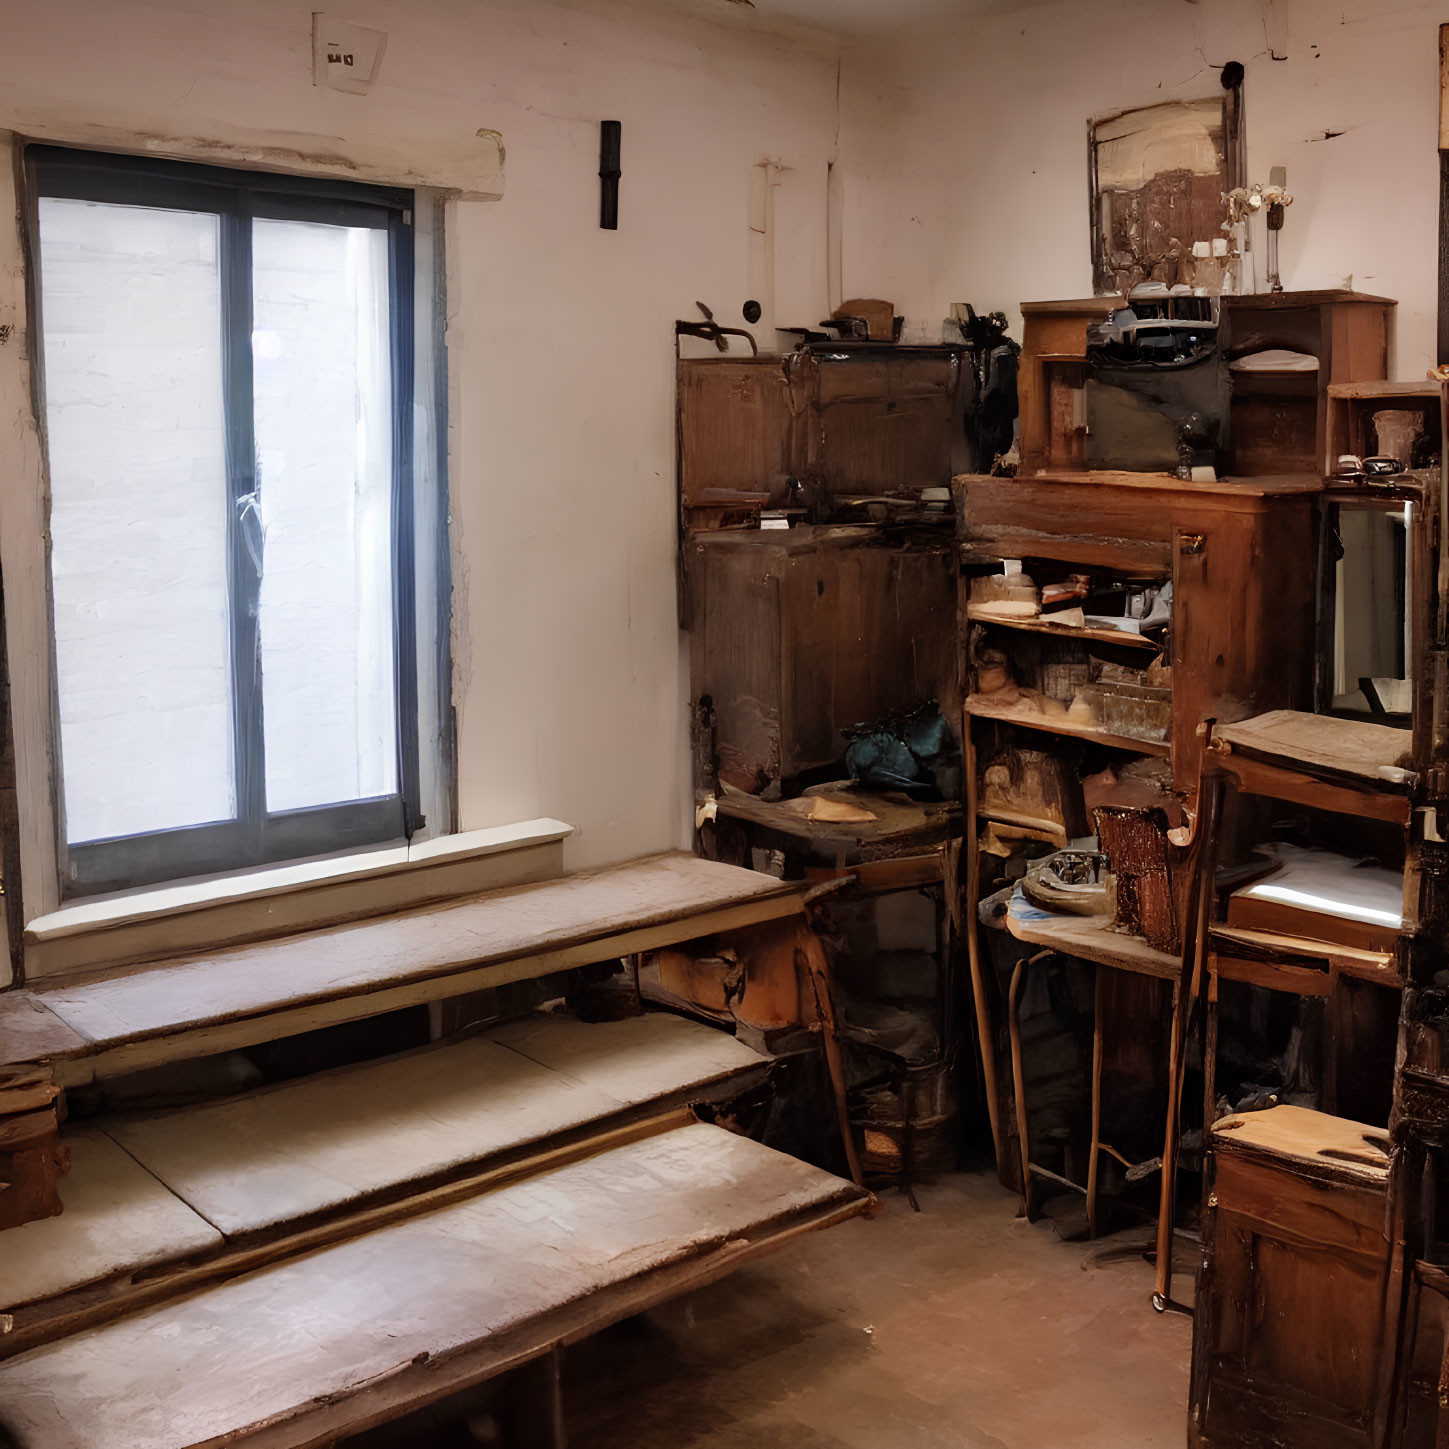 Vintage Workshop with Wooden Benches, Tools, and Machinery by Sunlit Window